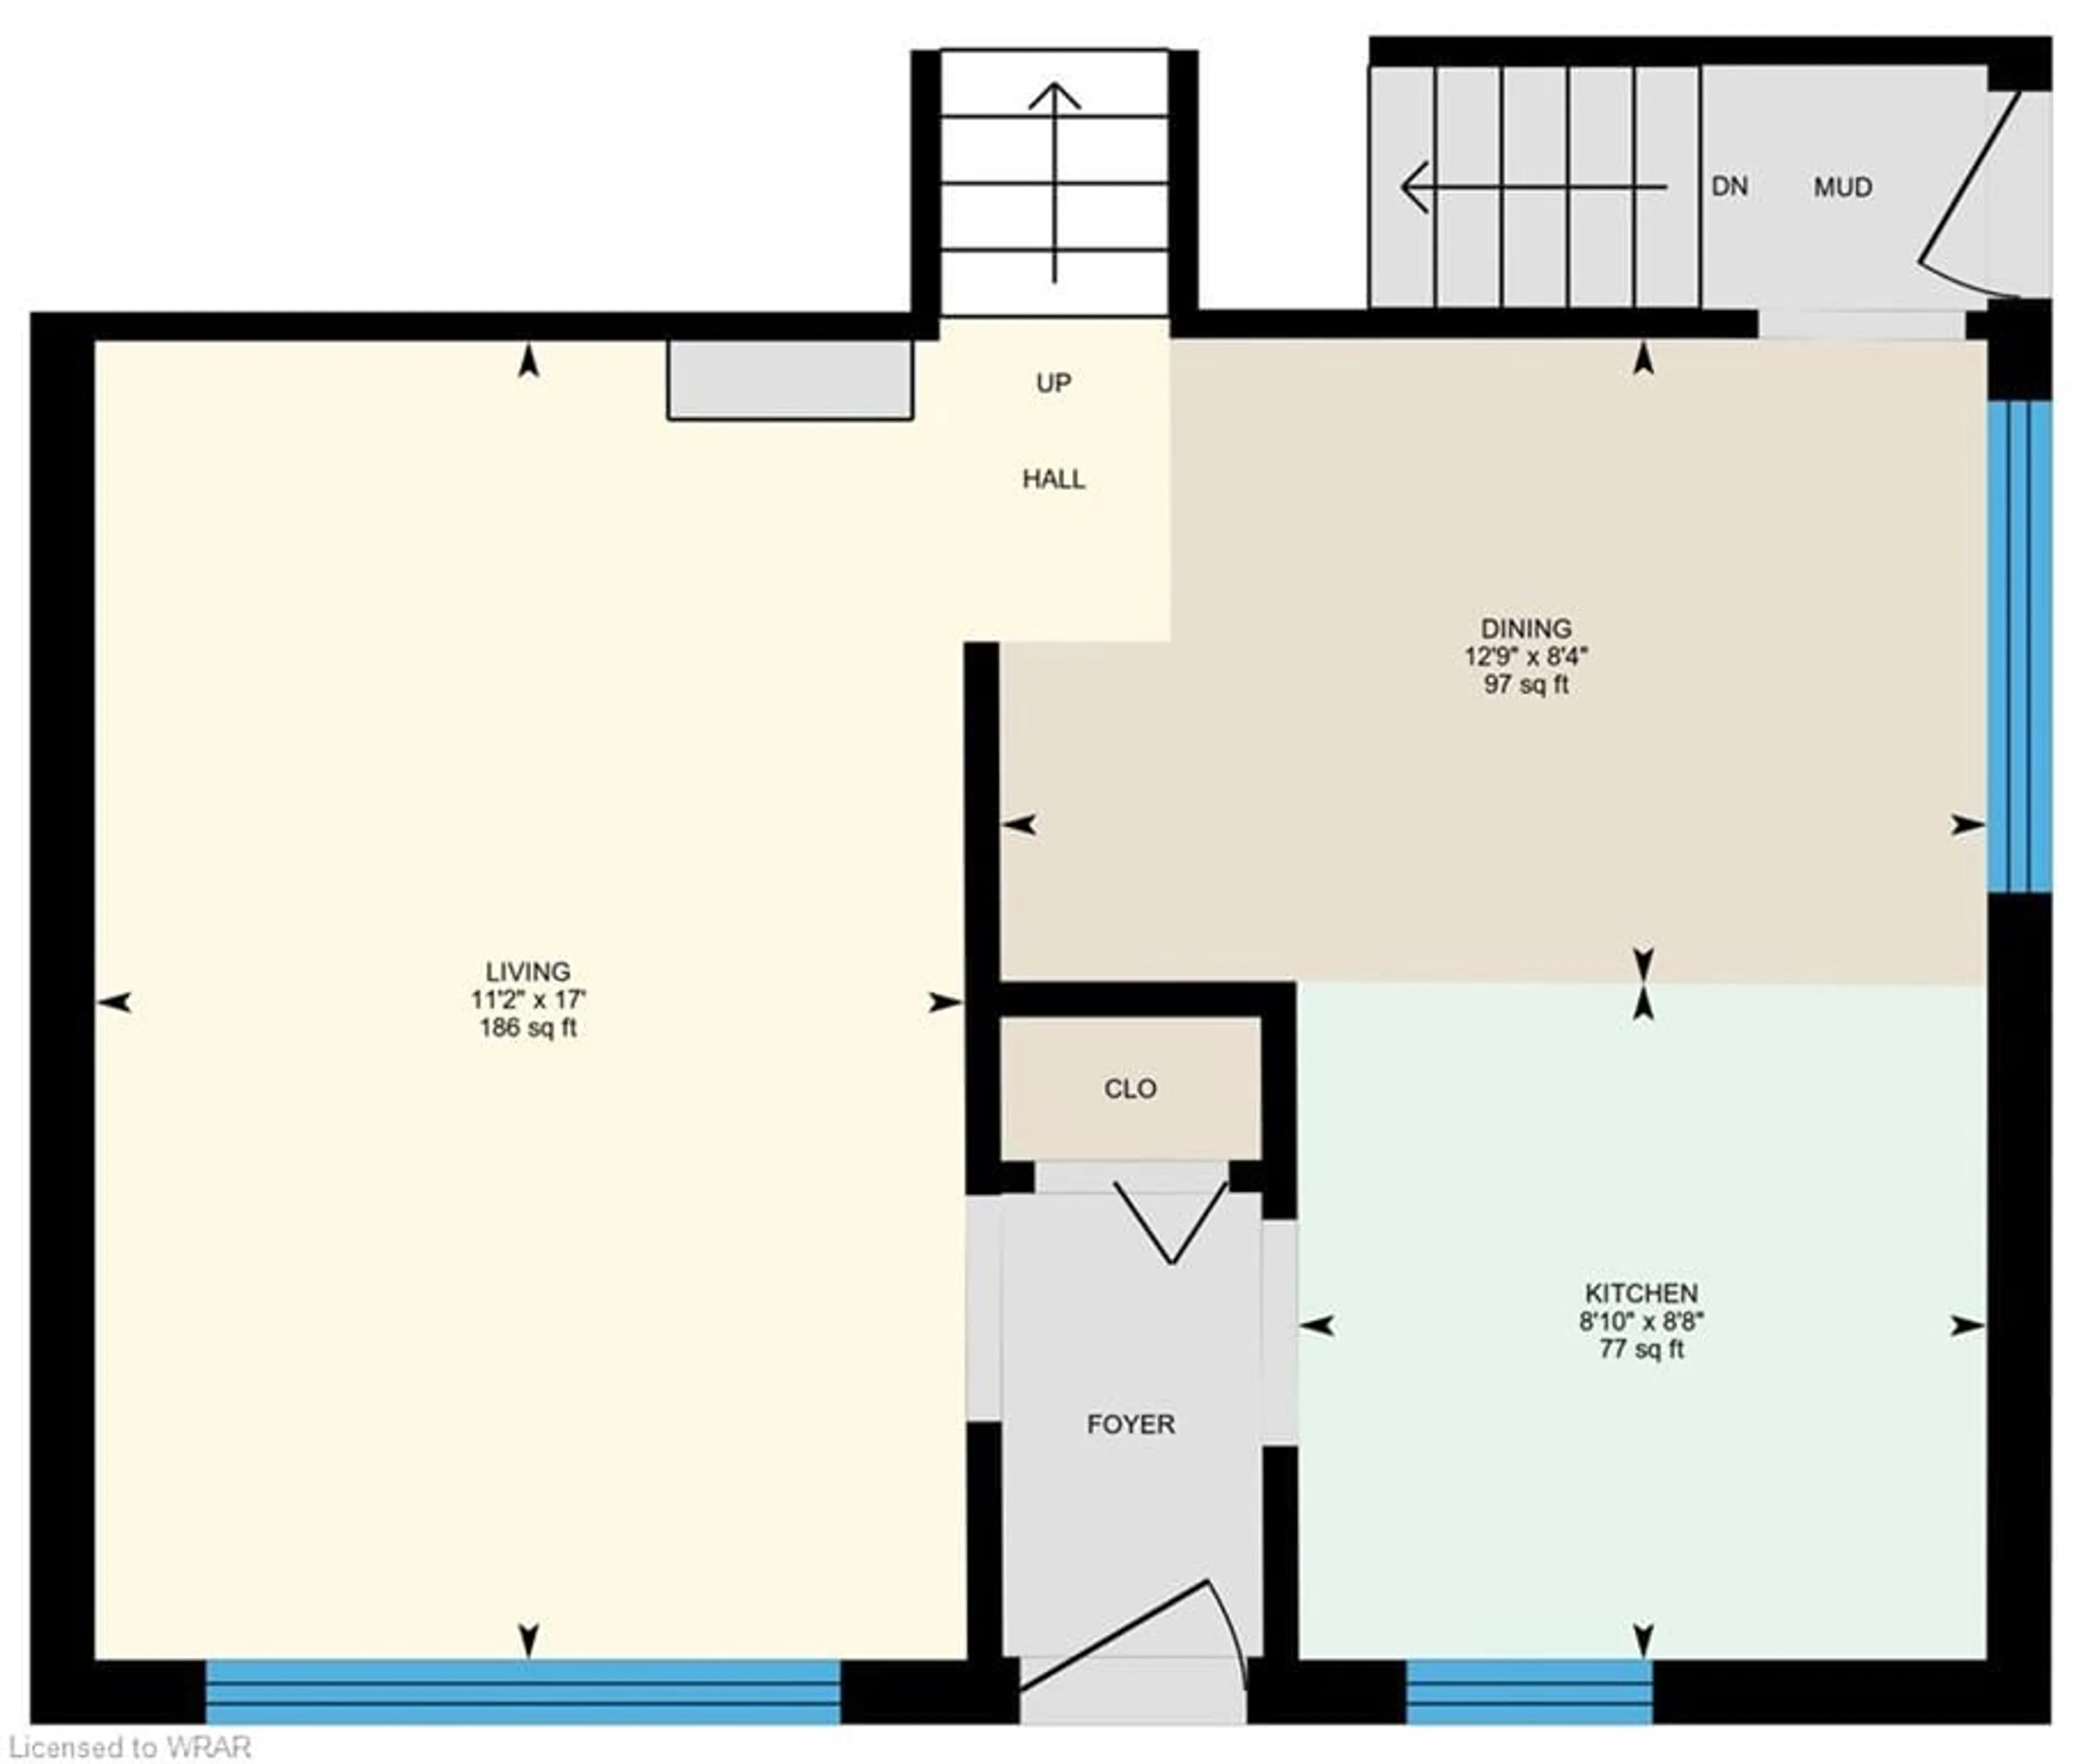 Floor plan for 53 Belcourt Cres, Guelph Ontario N1H 7A6